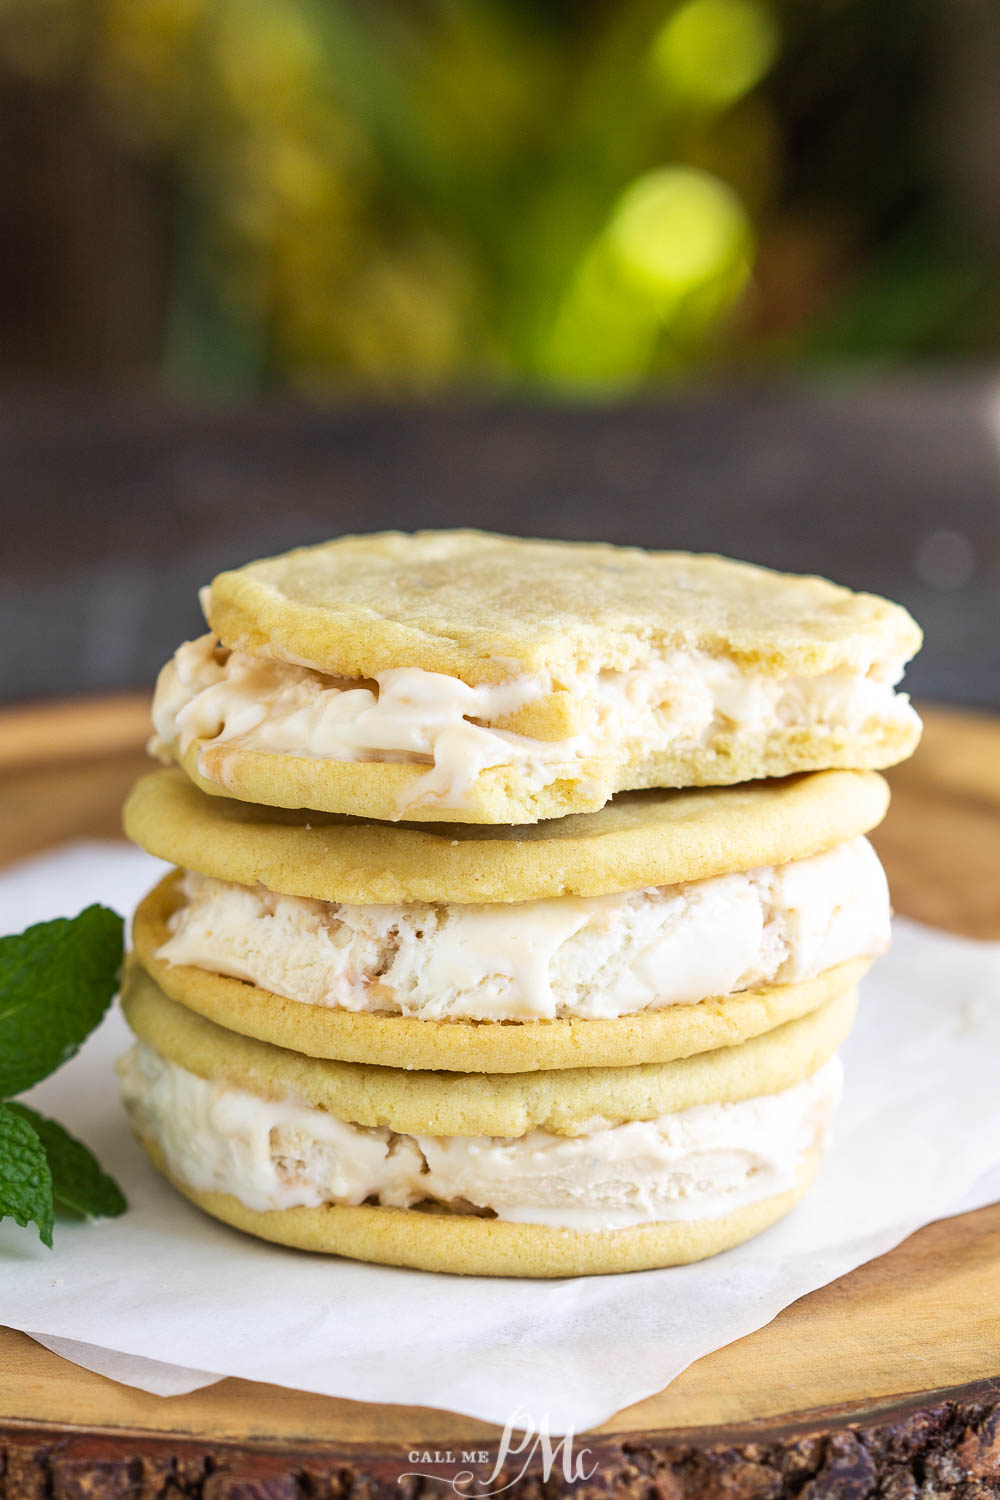 Georgia Peach Ice Cream Sandwich from The Masters is a bright refreshing ice cream sandwiched between two sugar cookies. It\'s the perfect summer dessert!